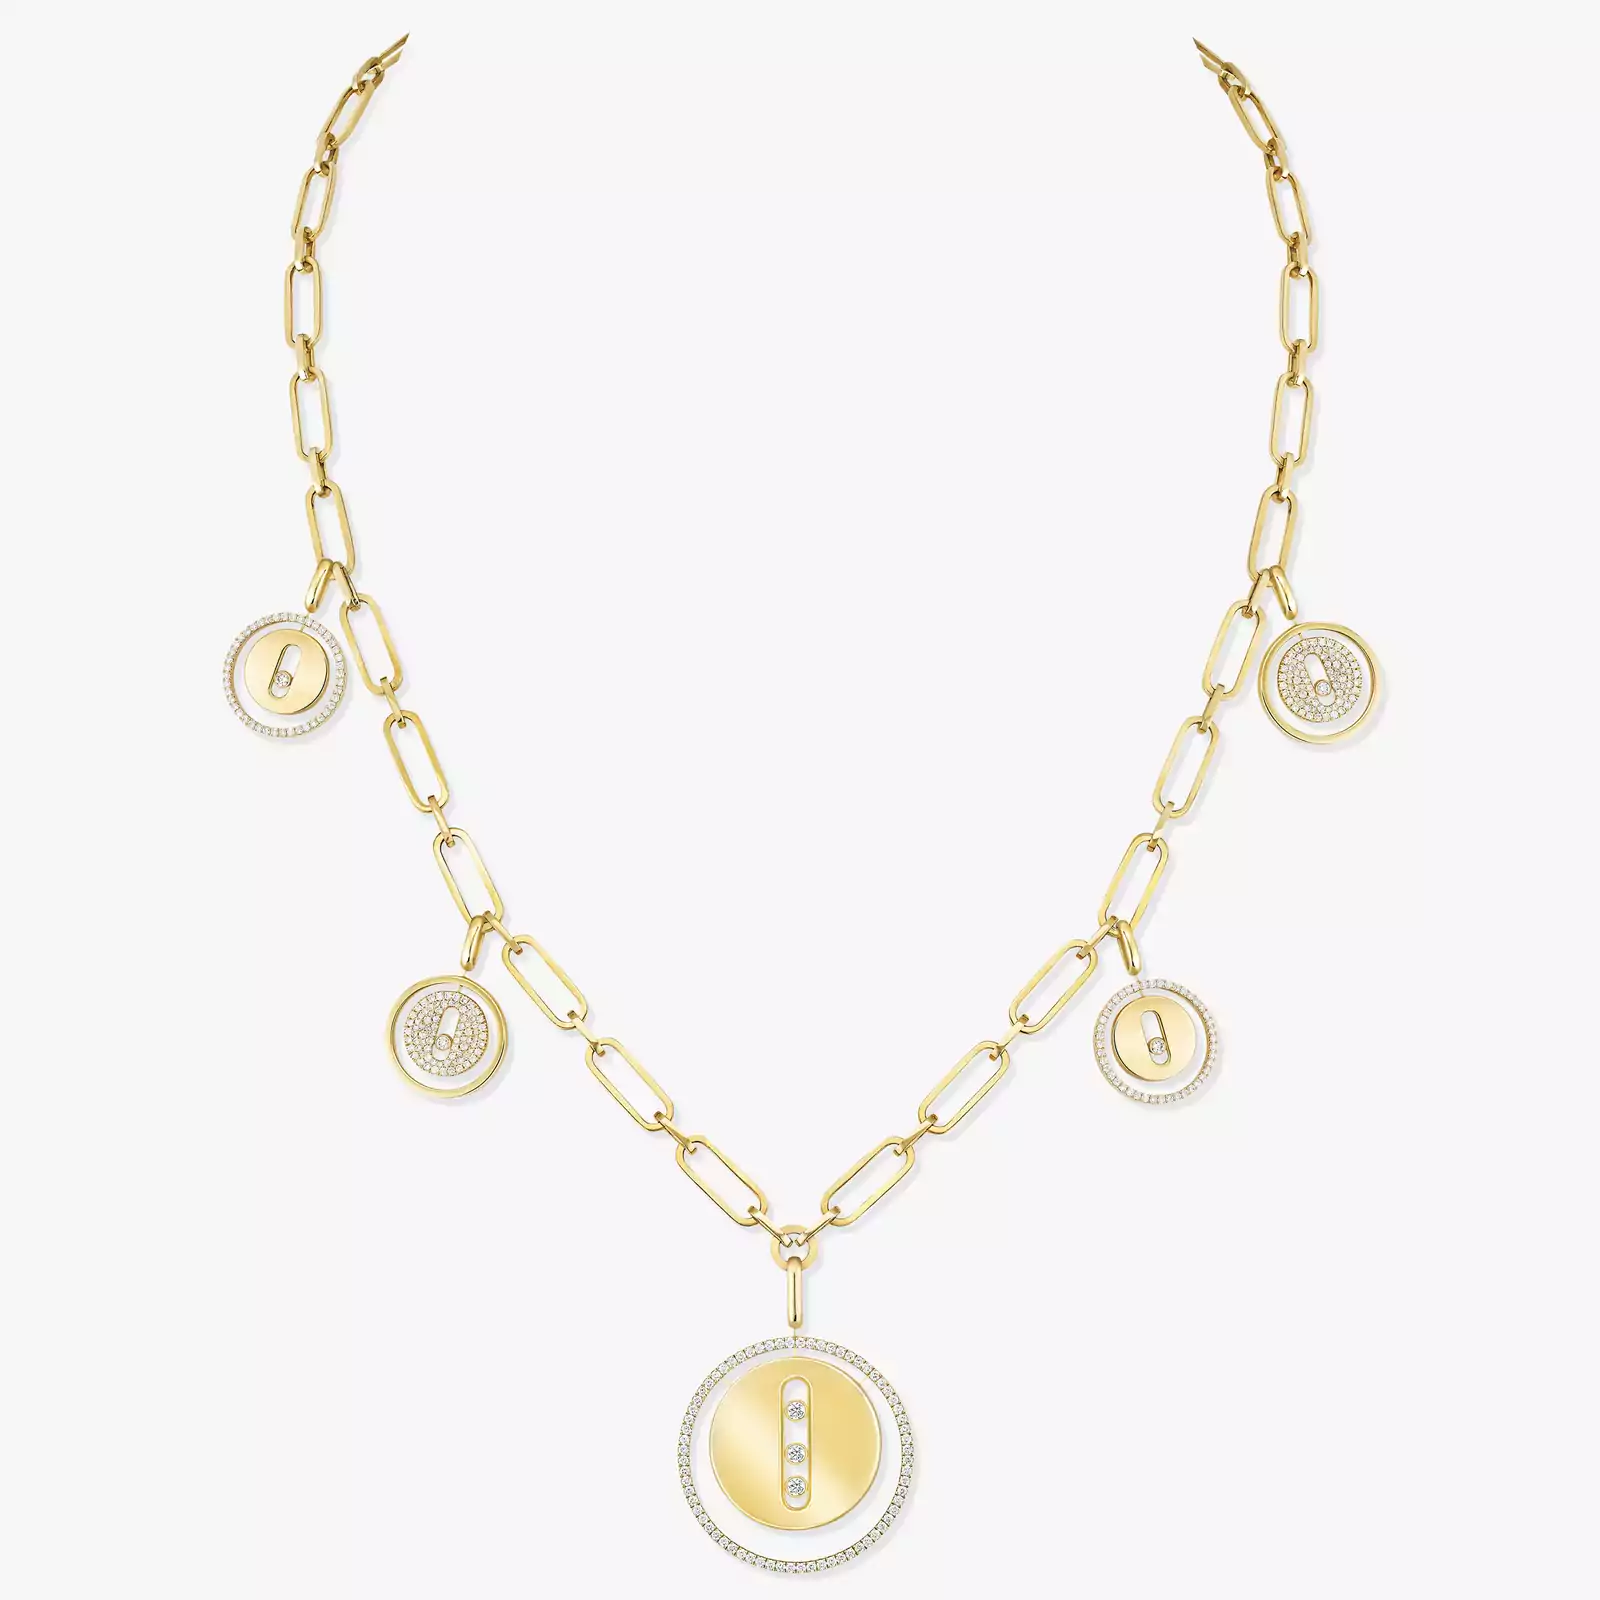 Necklace For Her Yellow Gold Diamond Lucky Move Charms 11728-YG